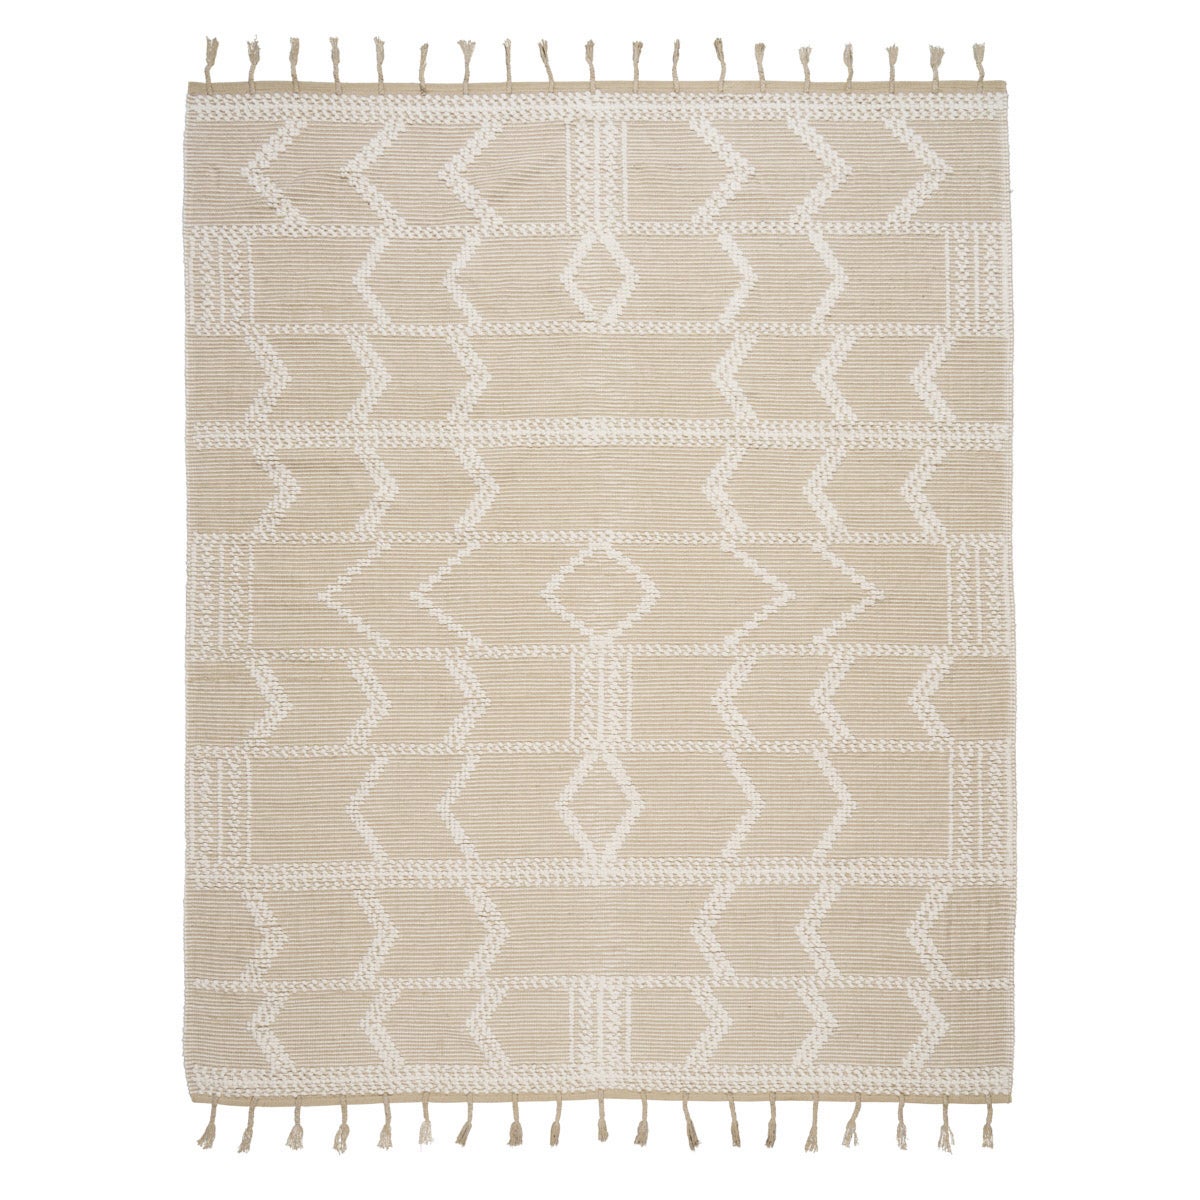 Malta French Knot Rug in Sand, 9x12' For Sale